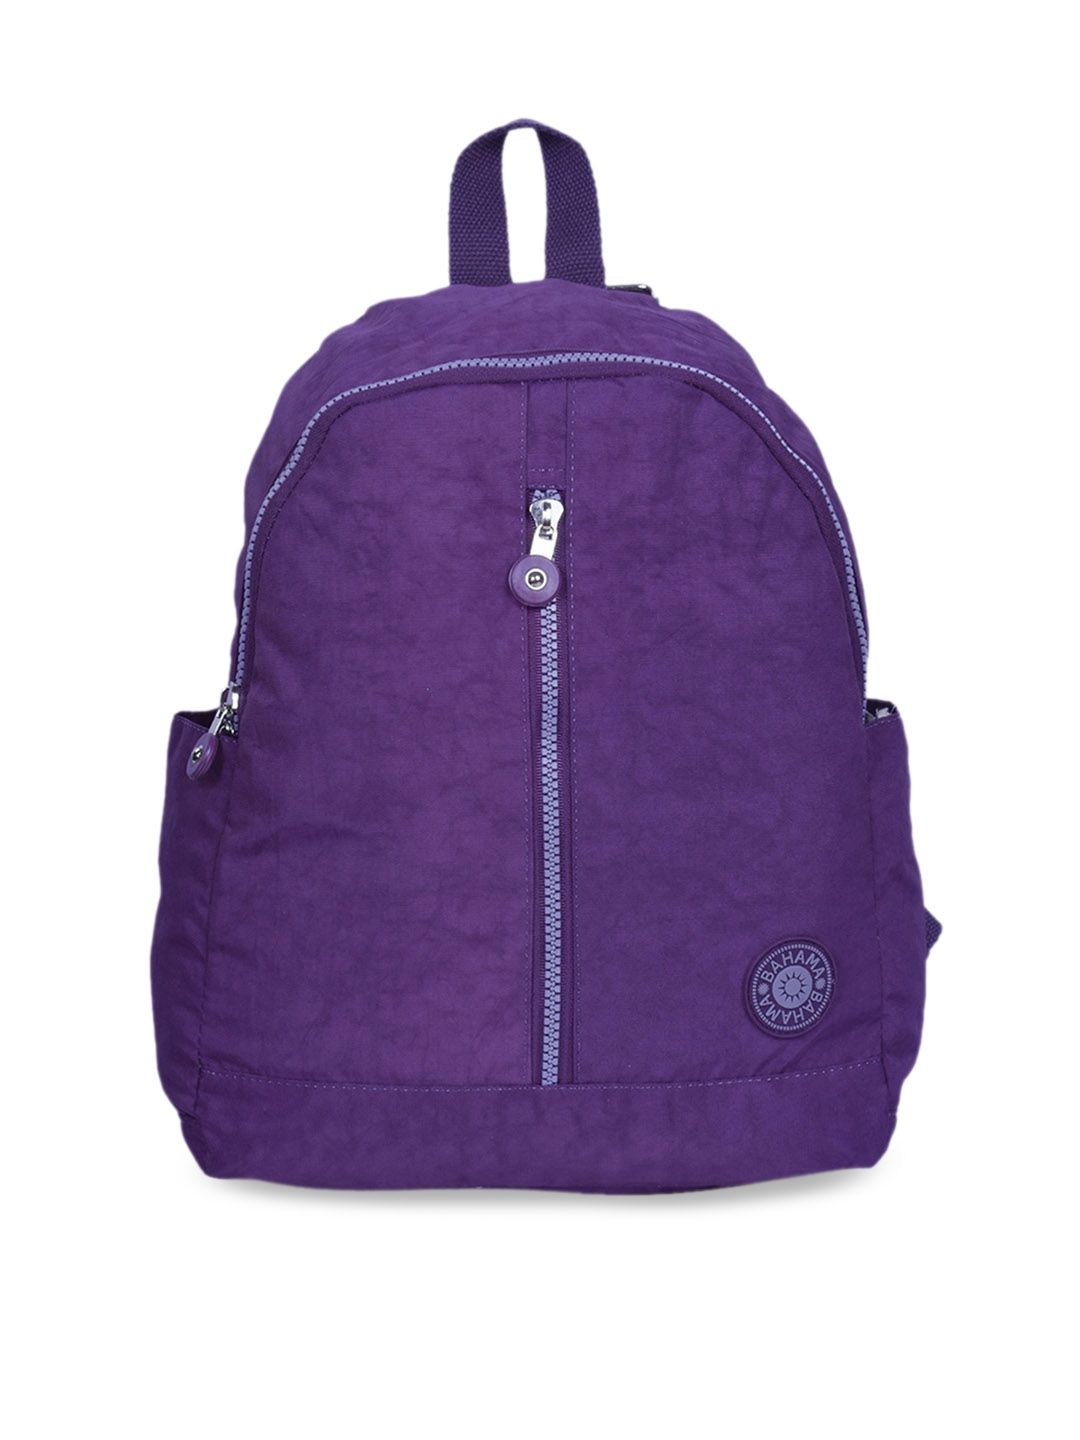 BAHAMA Crinkle Unisex Purple Solid Backpack Price in India